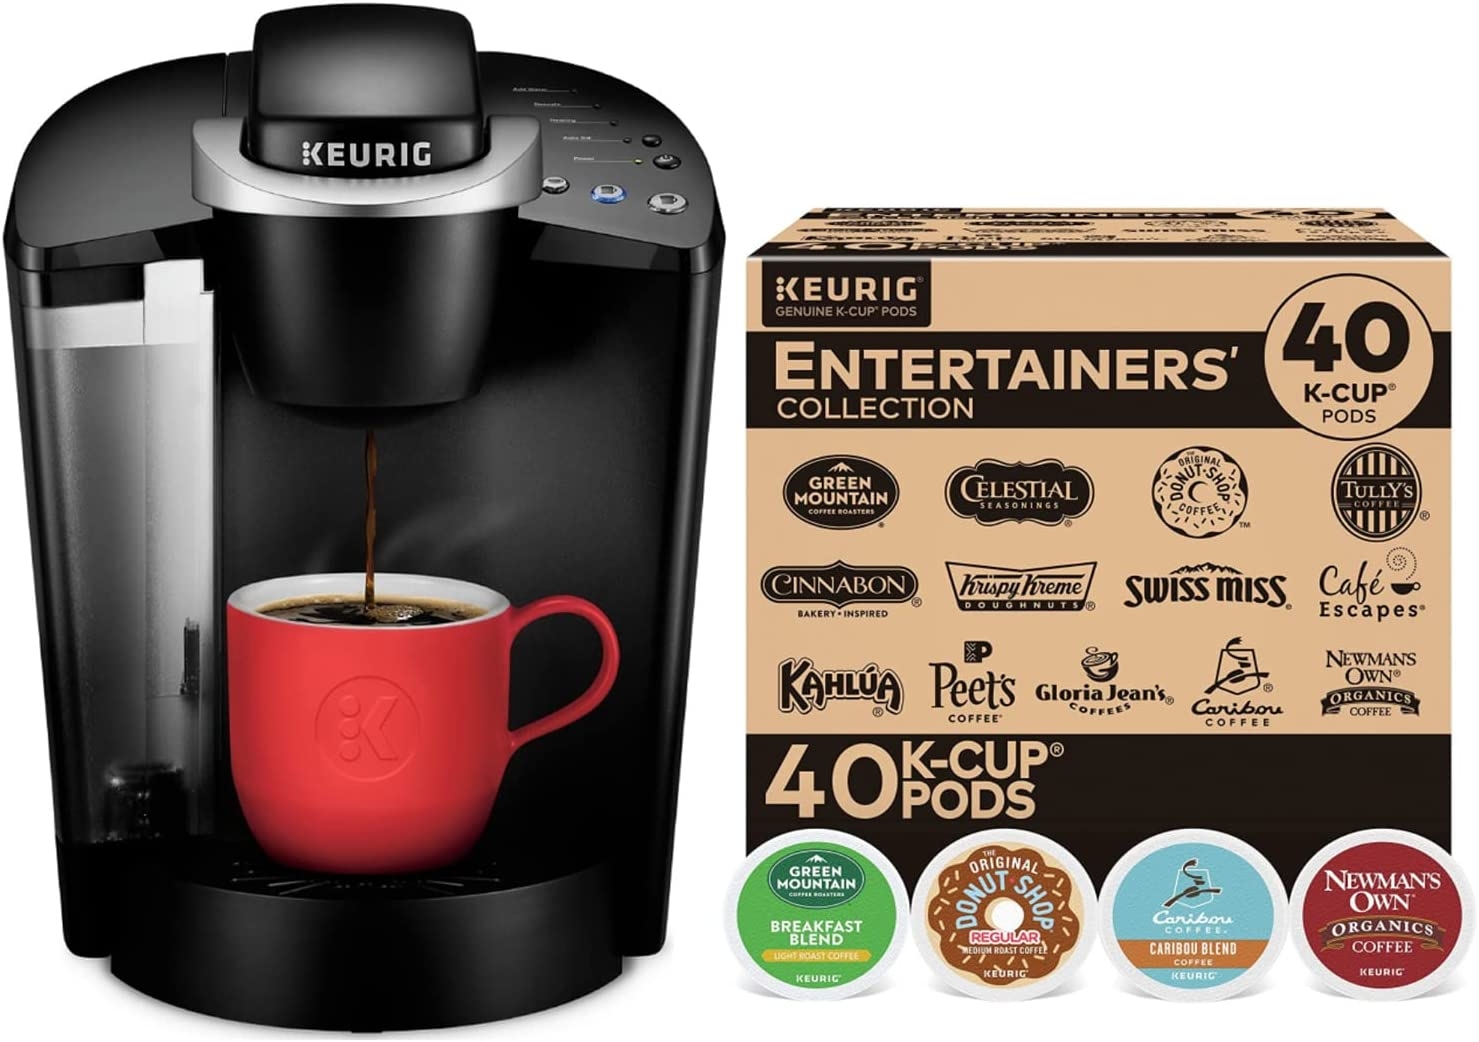 Keurig K-Classic Coffee Maker K-Cup Pod, Single Serve, Programmable, 6 to 10 oz. Brew Sizes, Black Import To Shop ×Product